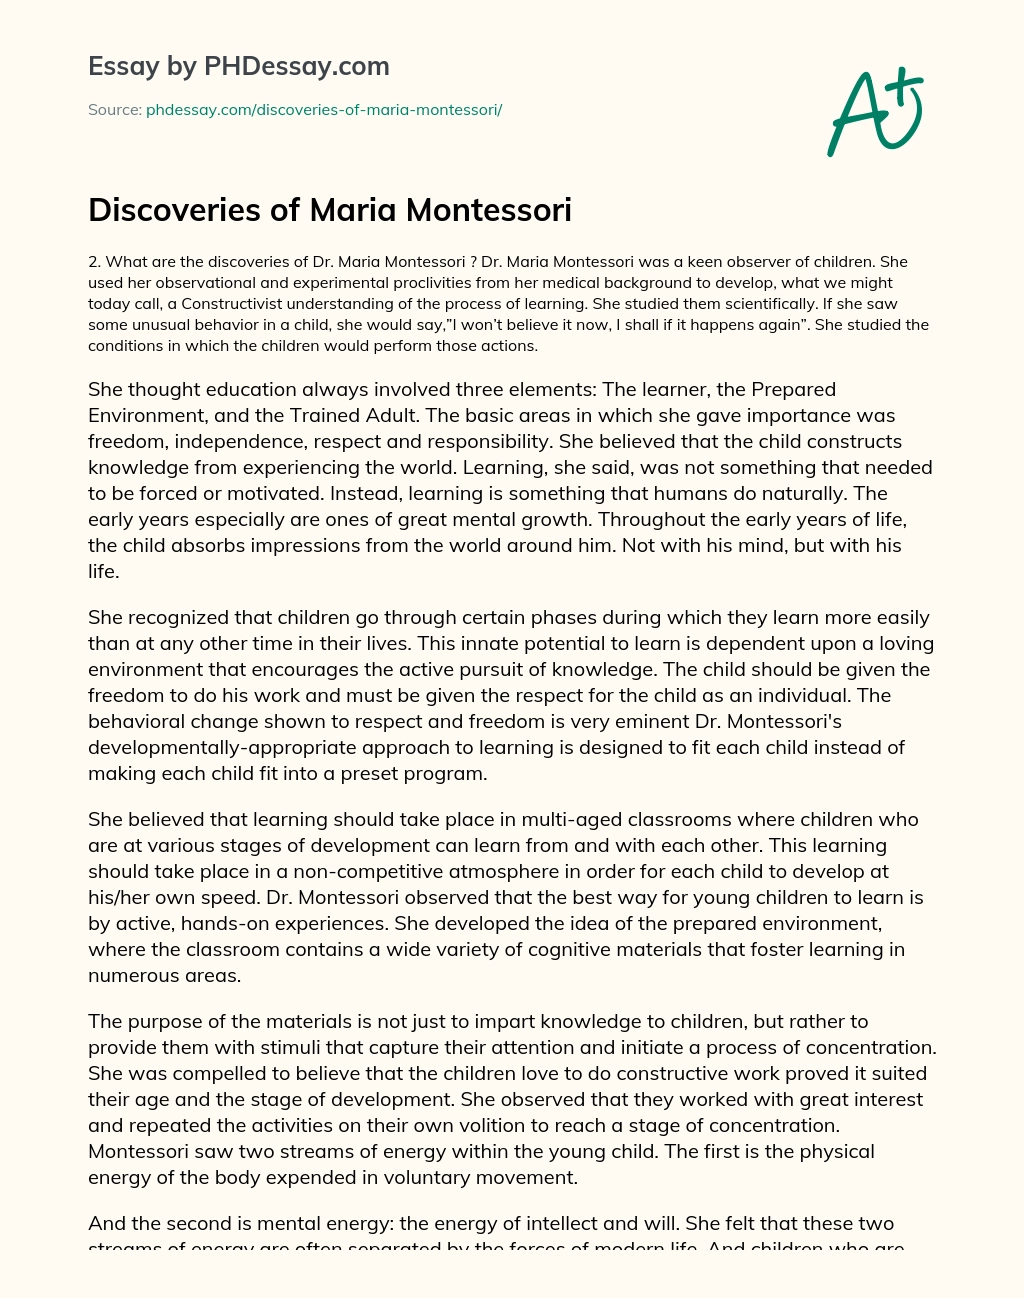 discoveries of maria montessori by observing the child